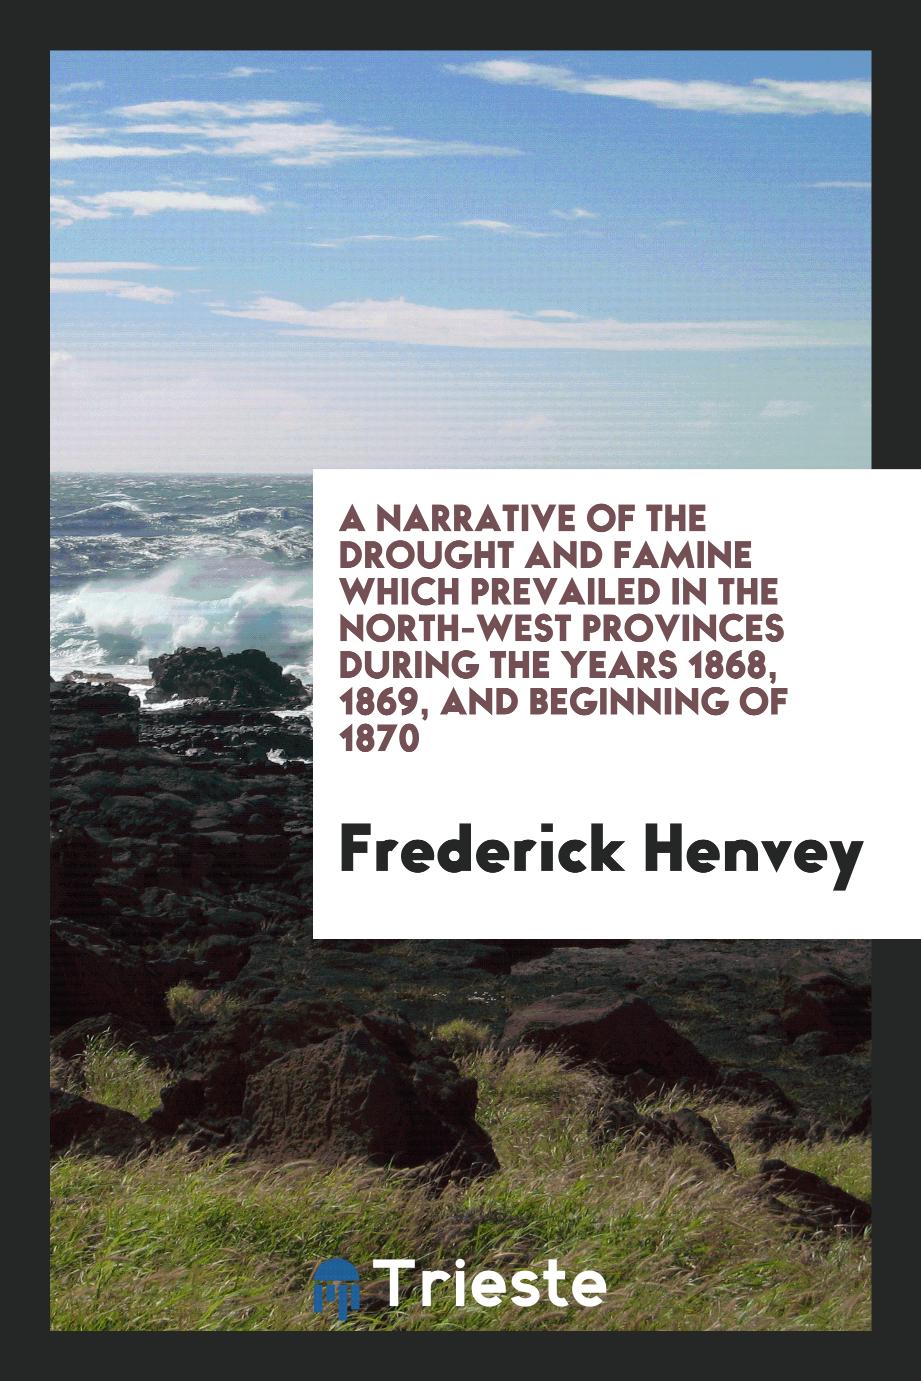 A Narrative of the Drought and Famine Which Prevailed in the North-West Provinces during the Years 1868, 1869, and Beginning of 1870